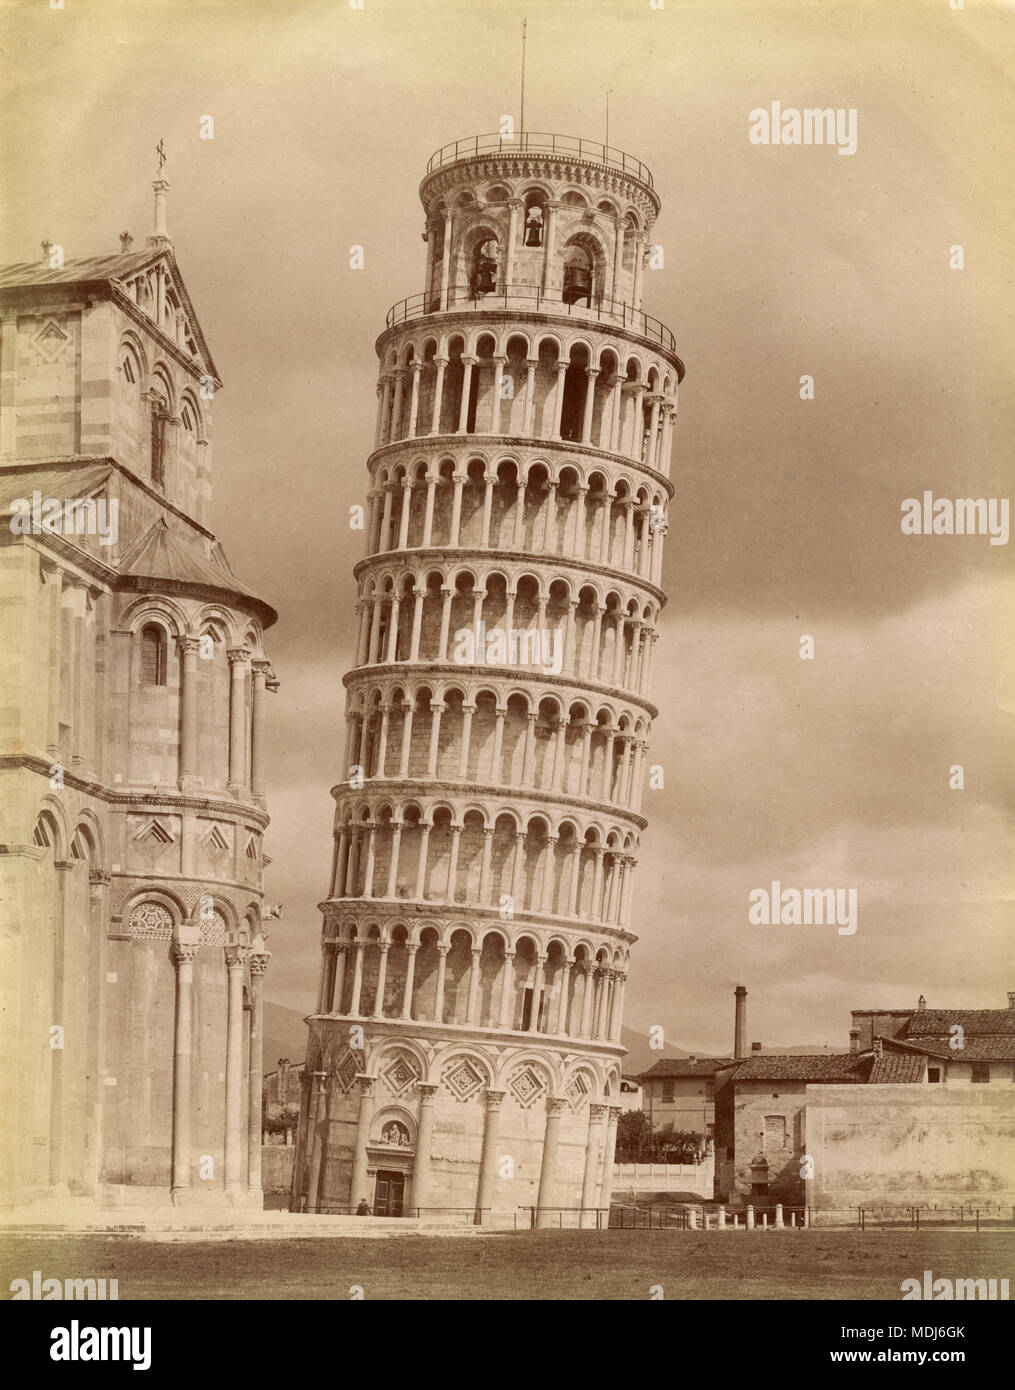 The leaning tower of Pisa, Italy 1880 Stock Photo